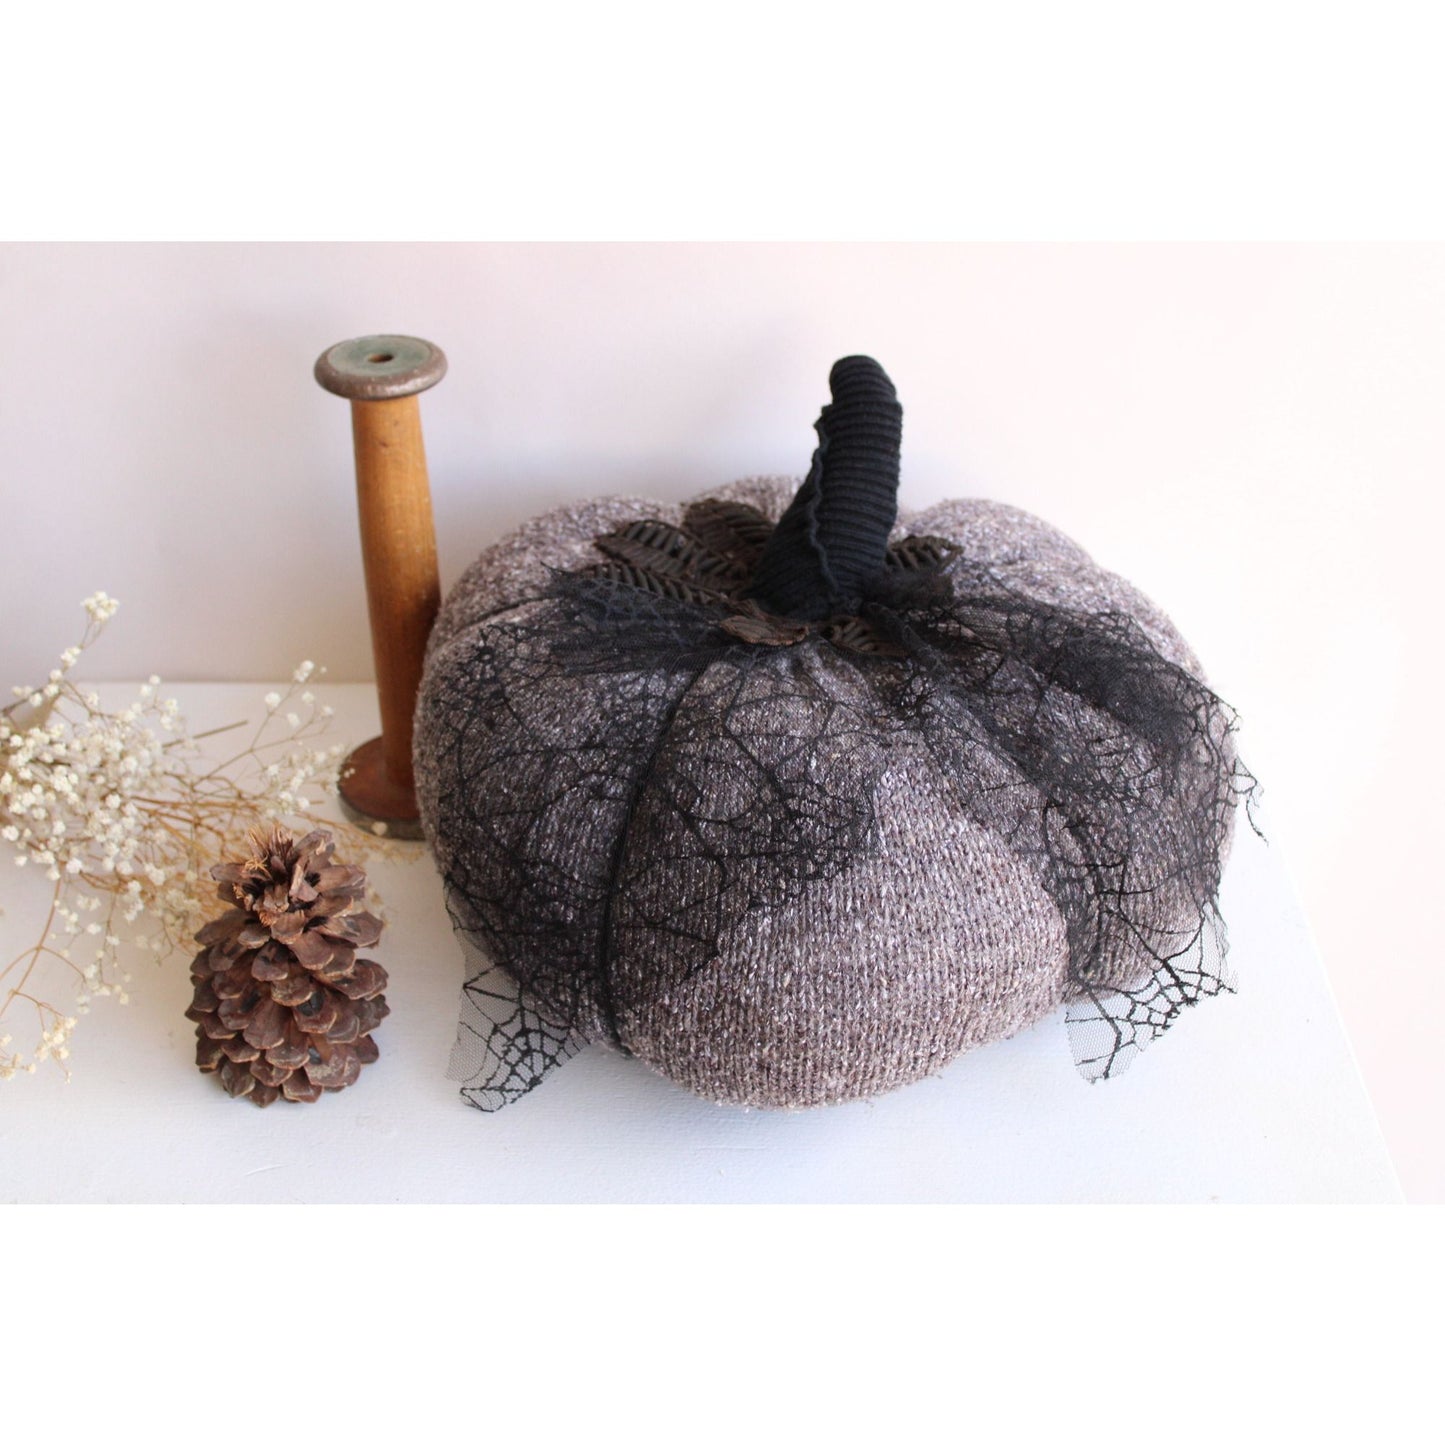 Extra Large Knit Pumpkin Pillow Pouf in Gray Tweed With Black Spiderweb Lace